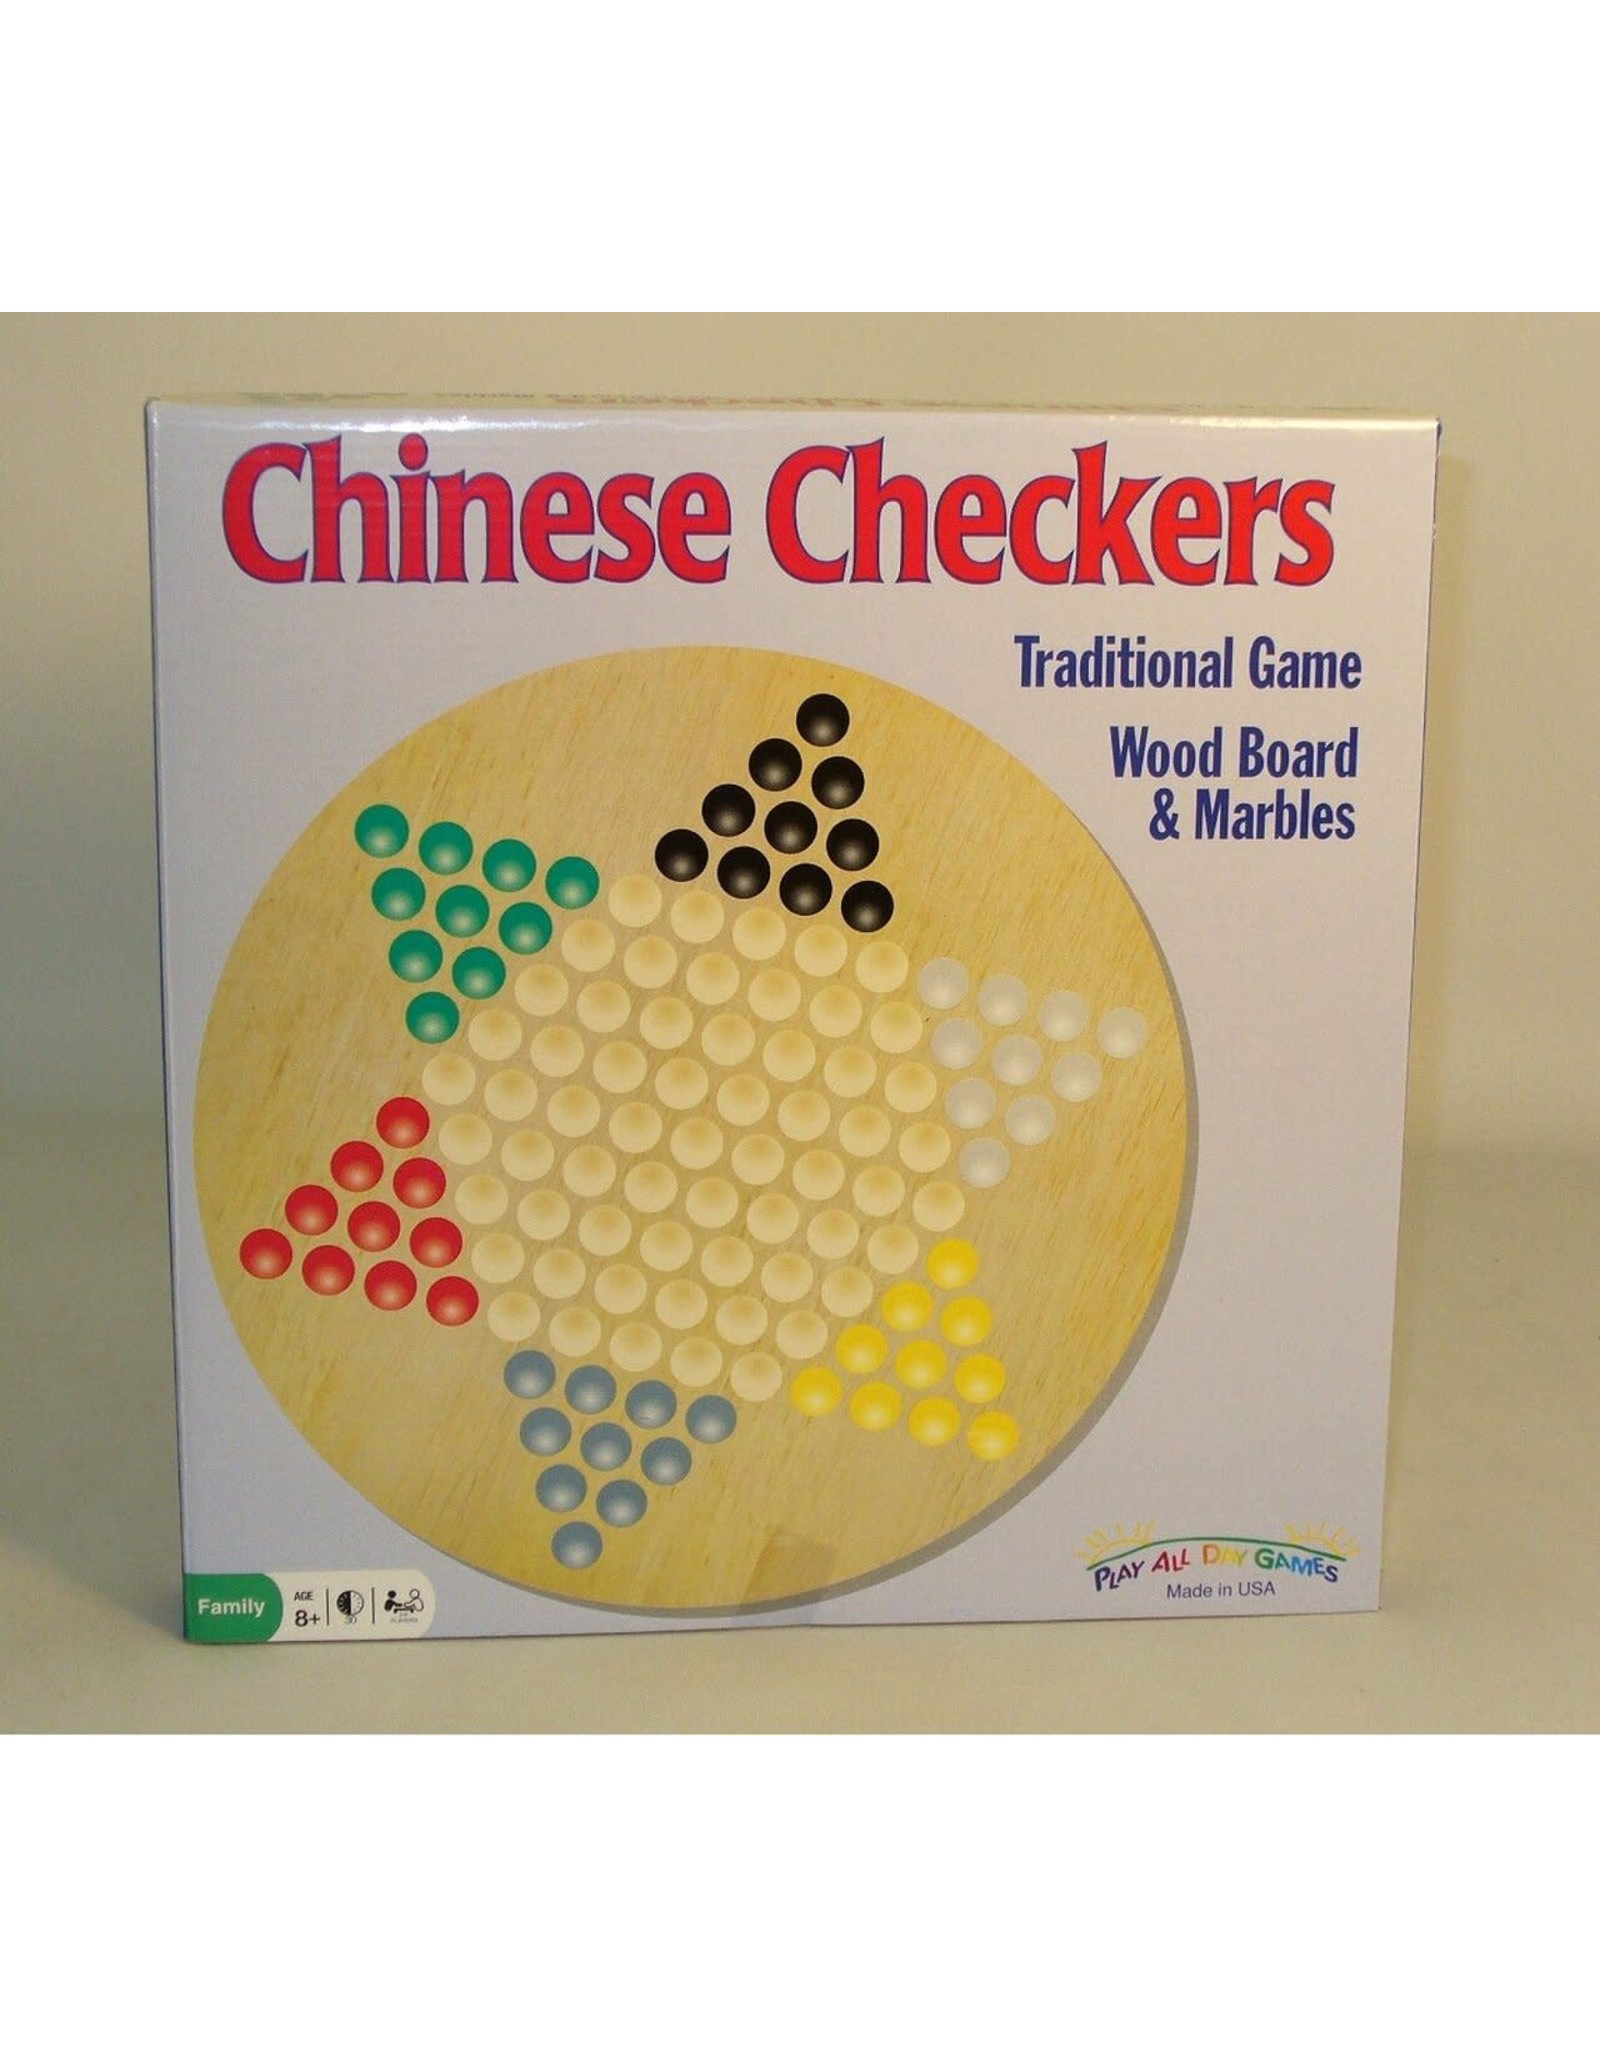 Play All Day Games Chinese Checkers wood board w marbles